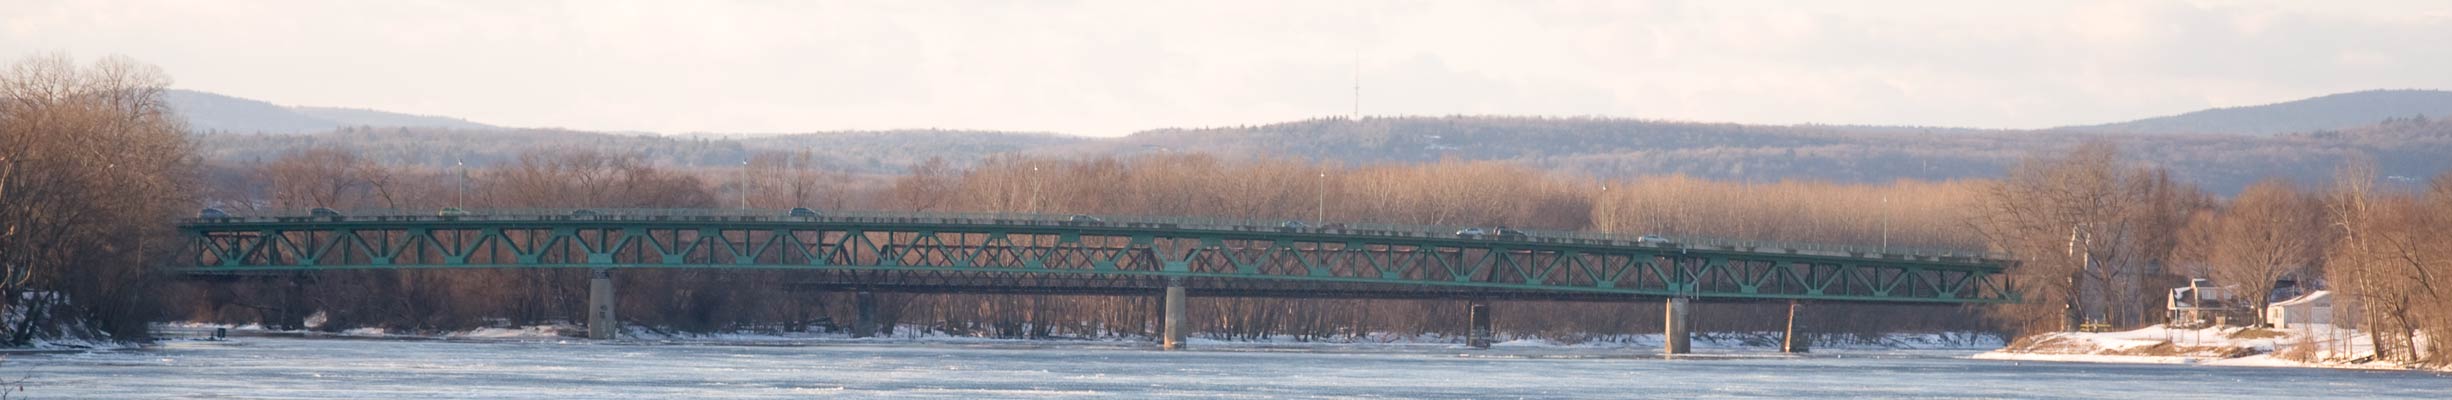 The Calvin Coolidge Bridge, with the Norwottuck Rail Trail Bridge behind it, over the Connecticut River in Northampton, Massachusetts